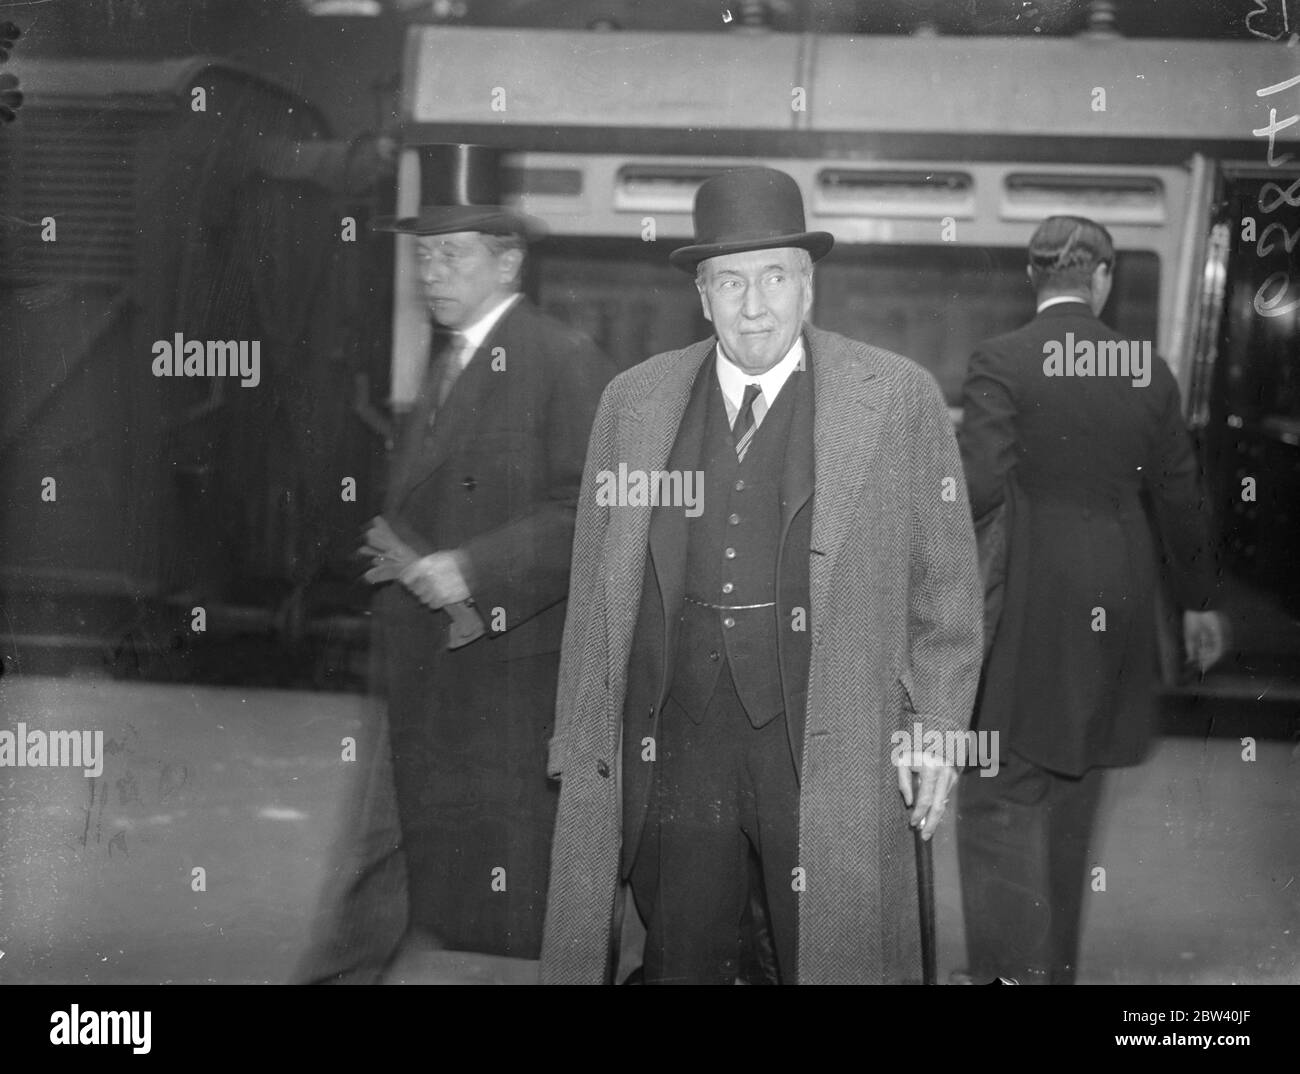 America's Coronation envoy arrives in London. Mr James W. Gerard, president Roosevelt's special envoy to Great Britain for the Coronation, arrived at Paddington Station, London with Mrs Gerard after landing from the Queen Mary at Plymouth. Mr Gerard was Ambassador in Berlin until the United States declared war. Photo shows: Mr James W Gerard on arrival at Paddington. 26 April 1937 Stock Photo